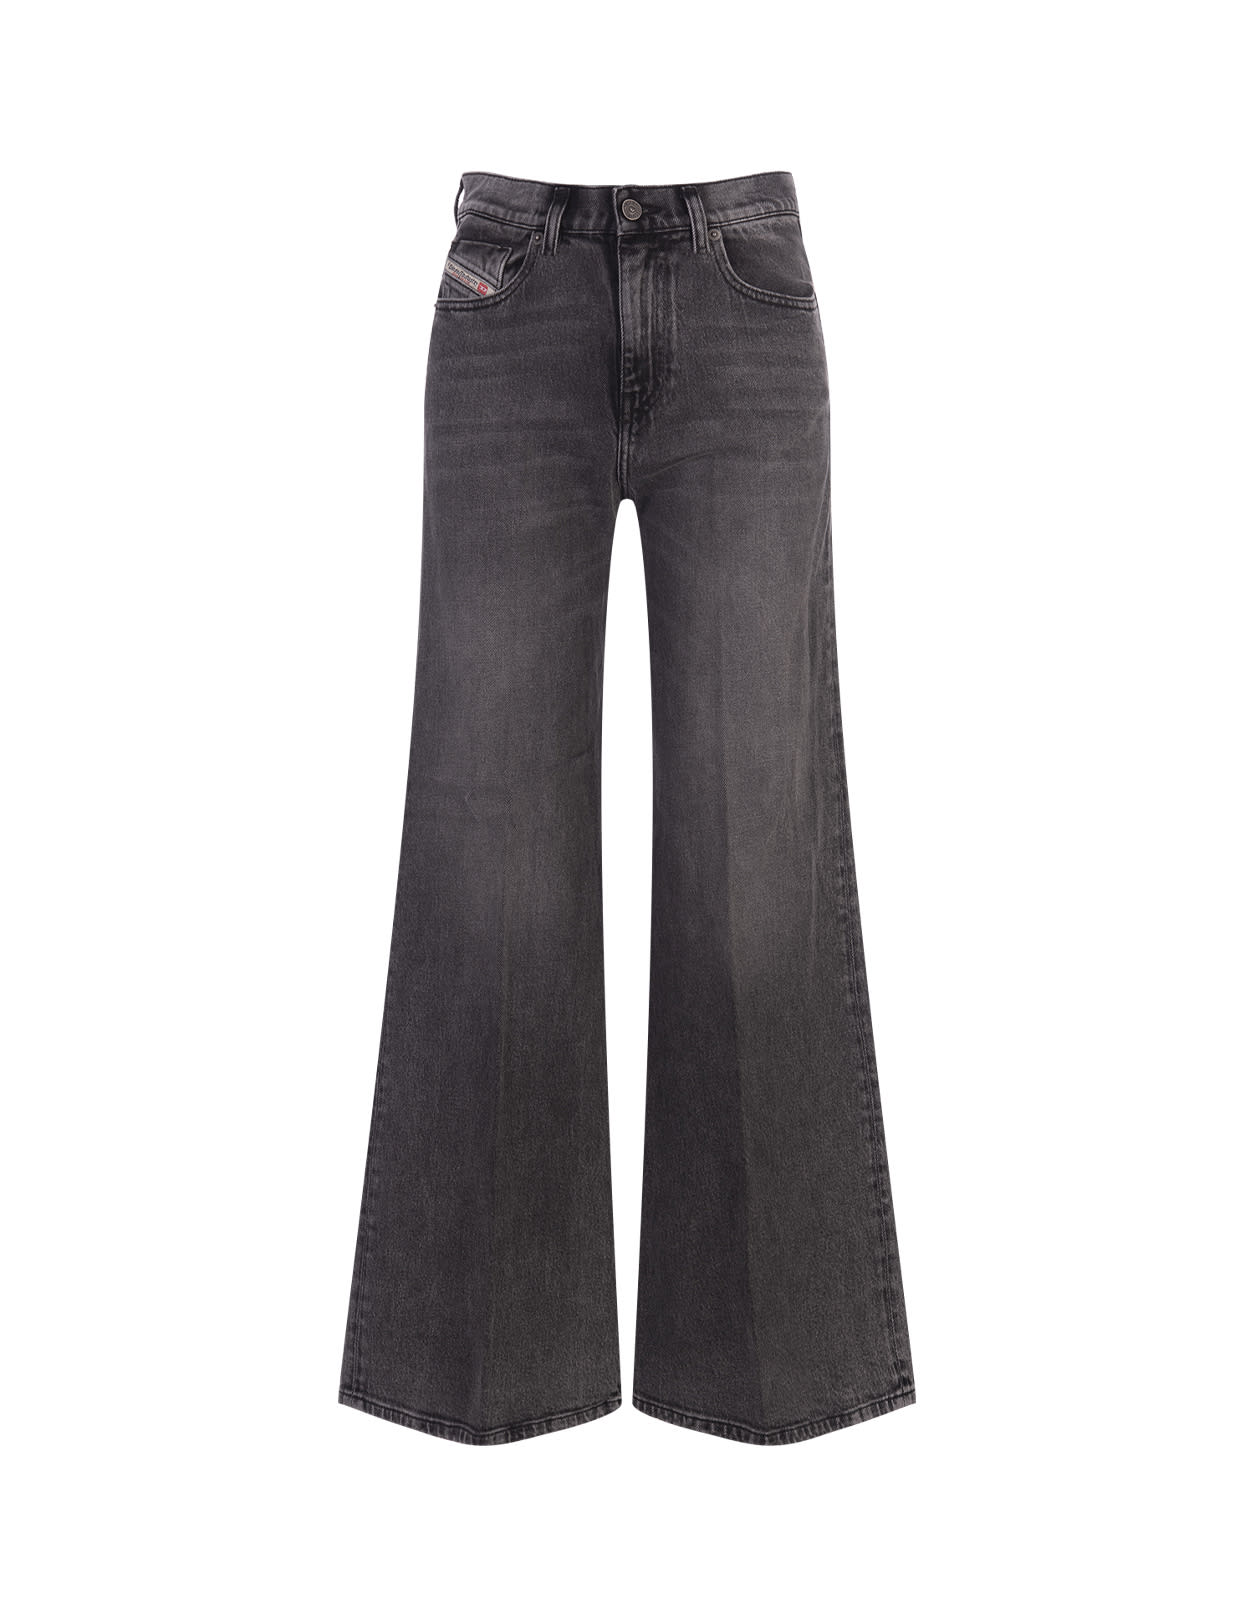 Diesel Bootcut And Flare Jeans 1978 D-akemi 09g57